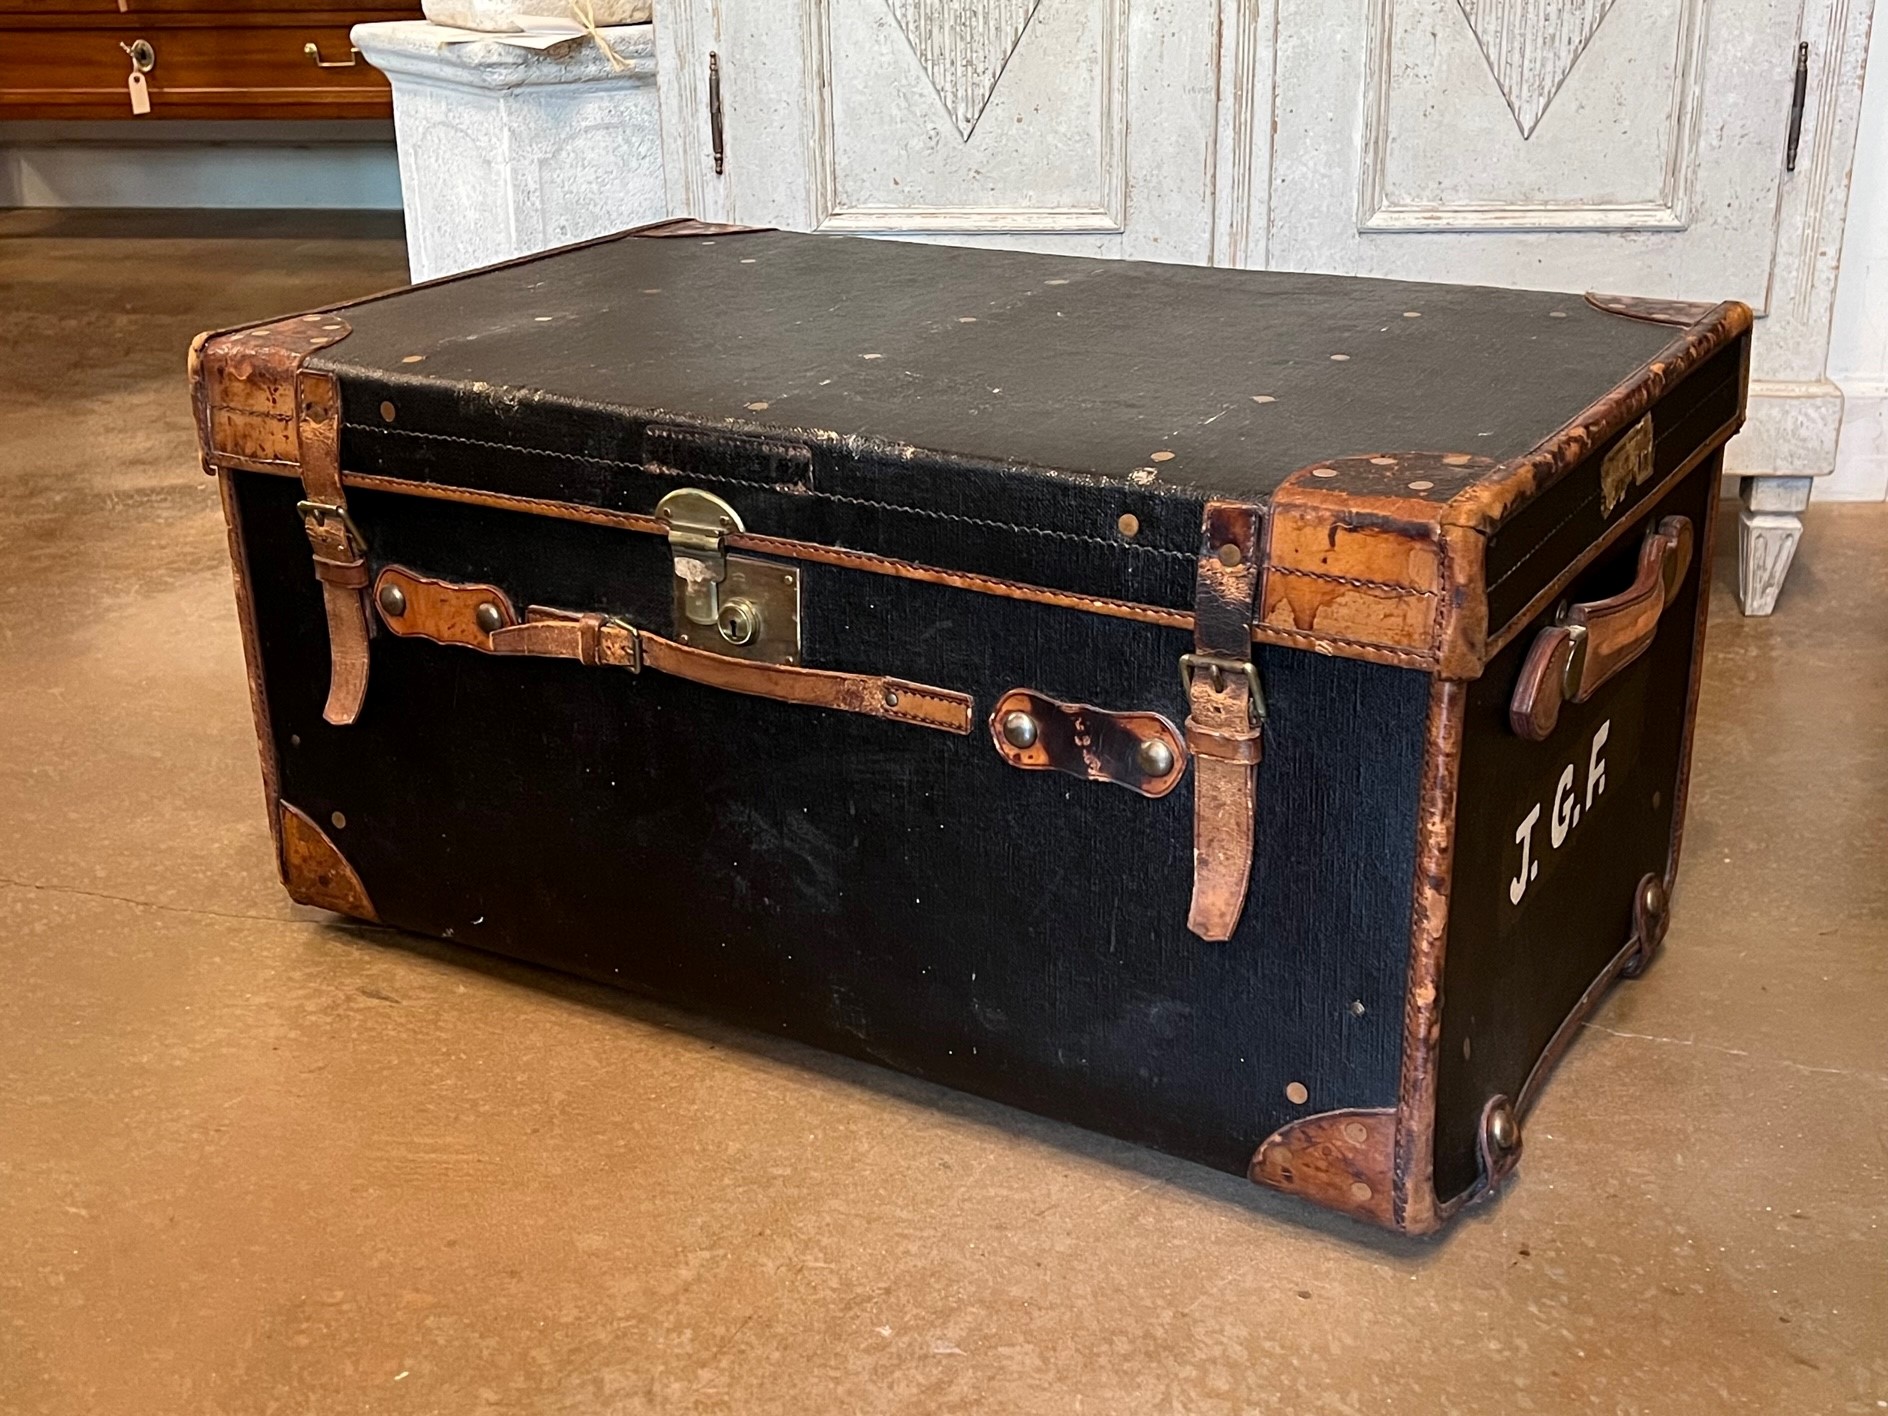 English Victorian Period 19th Century Black Traveling Trunk With Initials J.G.F.